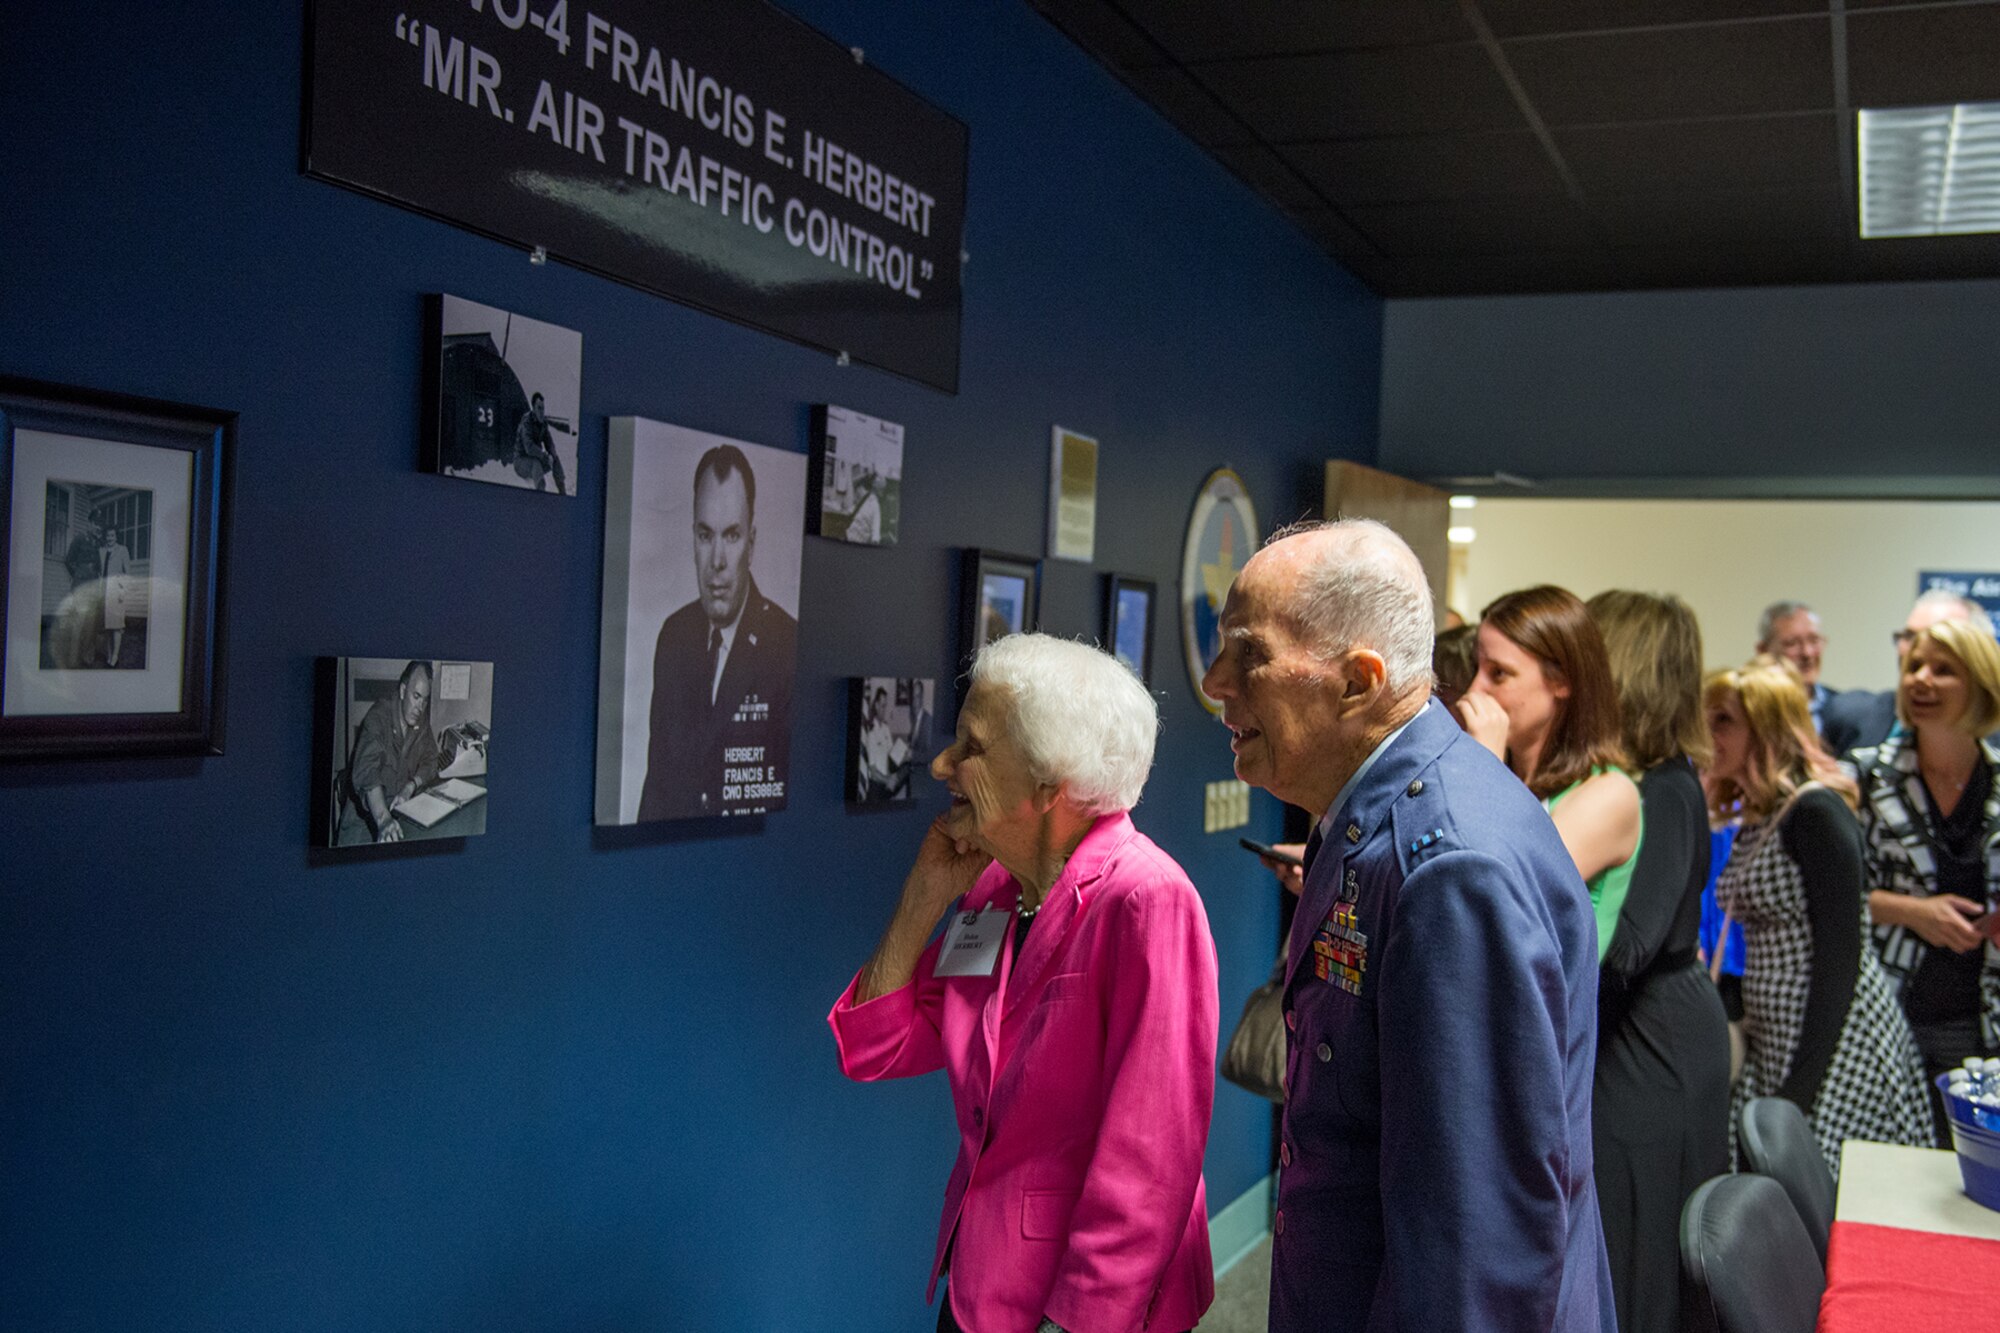 Retired Chief Warrant Officer 4 Francis Herbert, and his wife, Helen, view memorabilia in the tower lab room at Cody Hall April 26, 2016, Keesler Air Force Base, Miss.  The room was dedicated to him for his 50 years of service in air traffic control when he served in the Army, Army Air Corps, and Air Force from 1942-1972, then as a Keesler civilian instructor for 20 years. (U.S. Air Force photo by Marie Floyd)